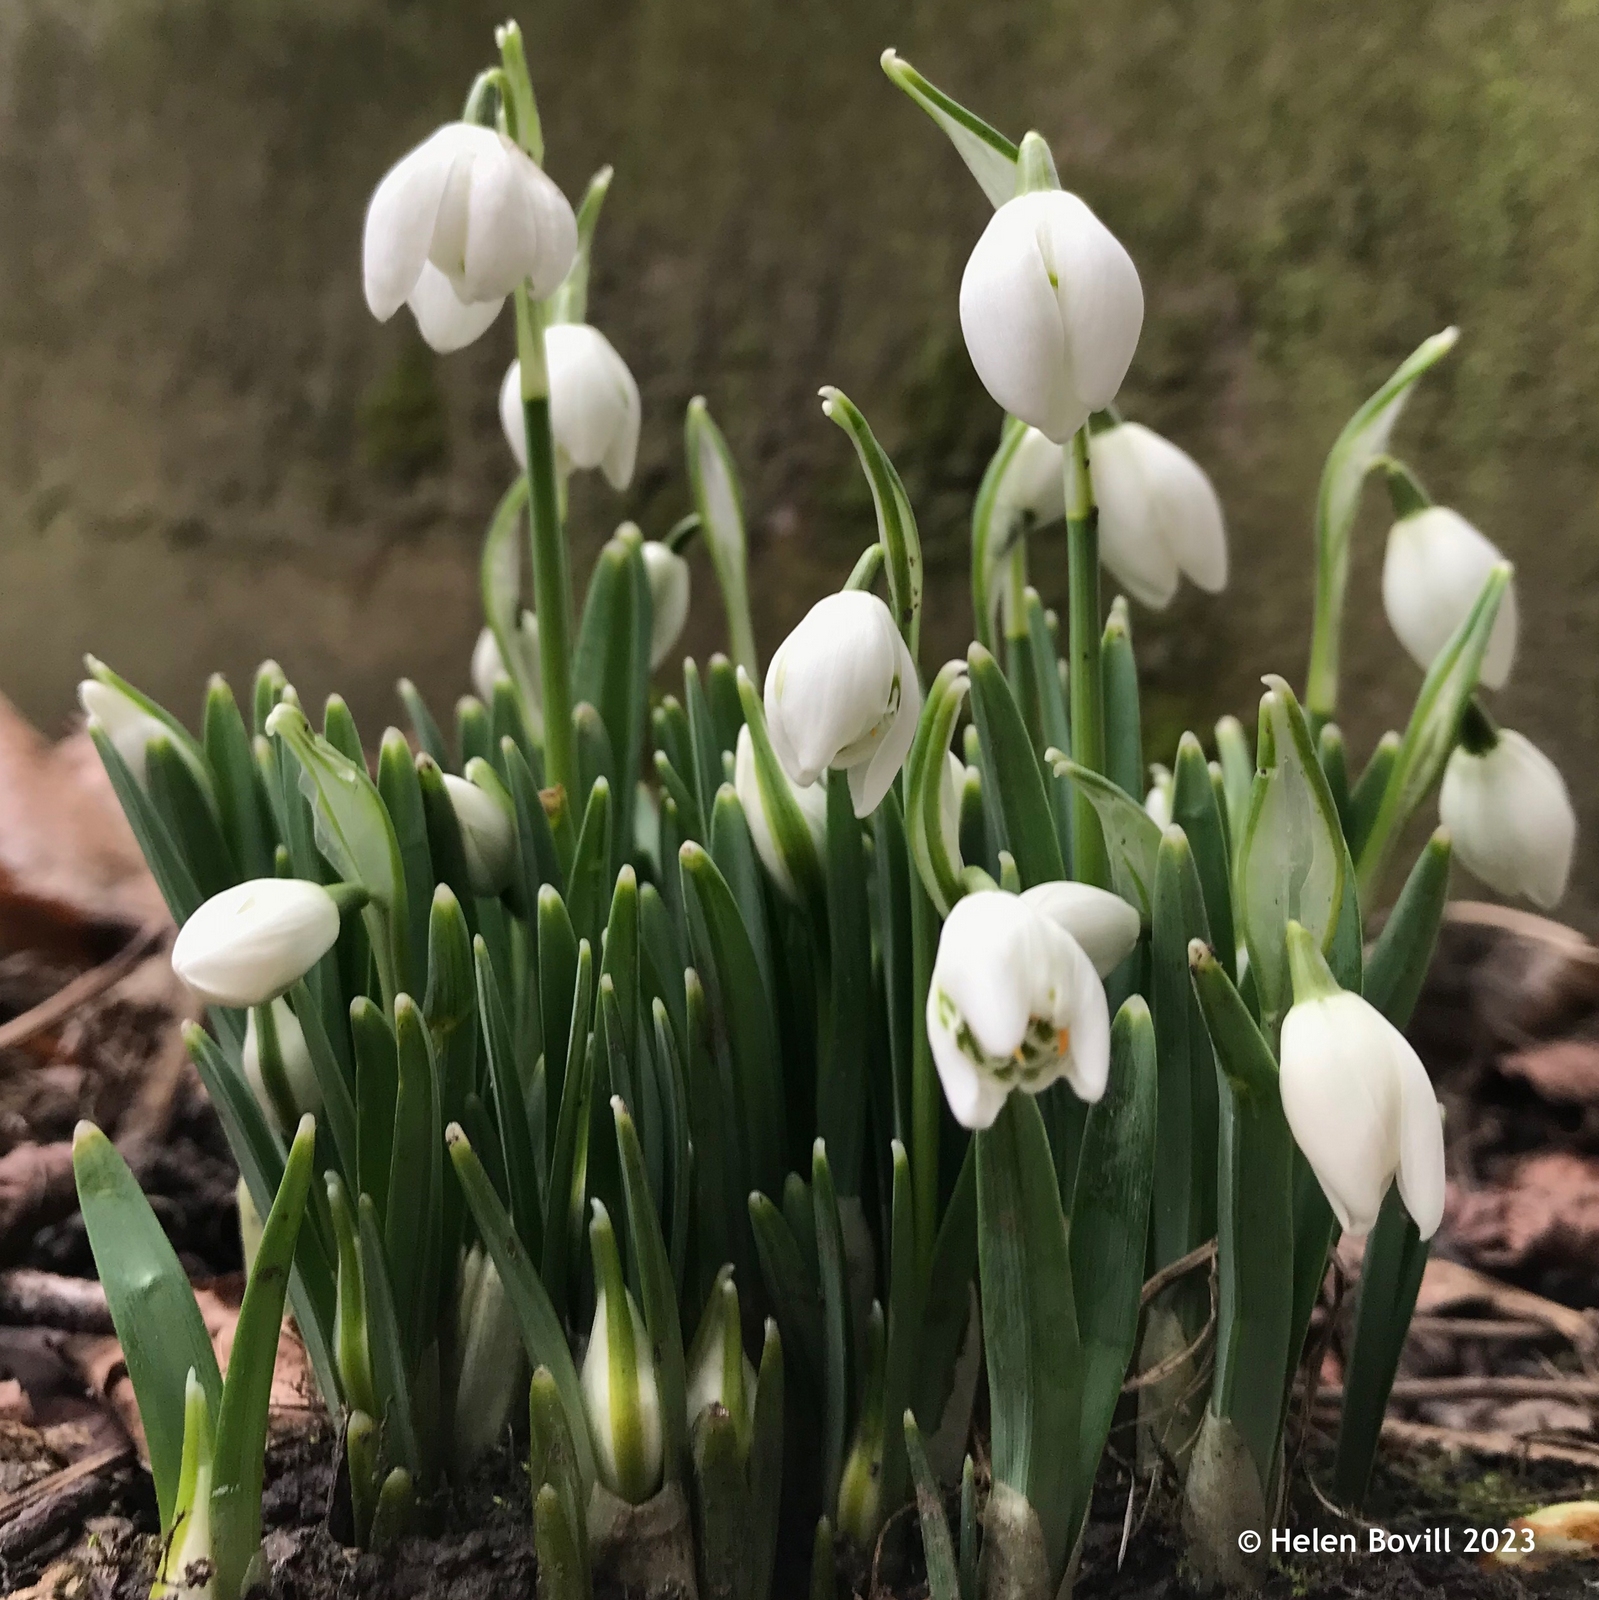 A cluster of double Snowdrops in the Quaker Burial Ground section of the cemetery